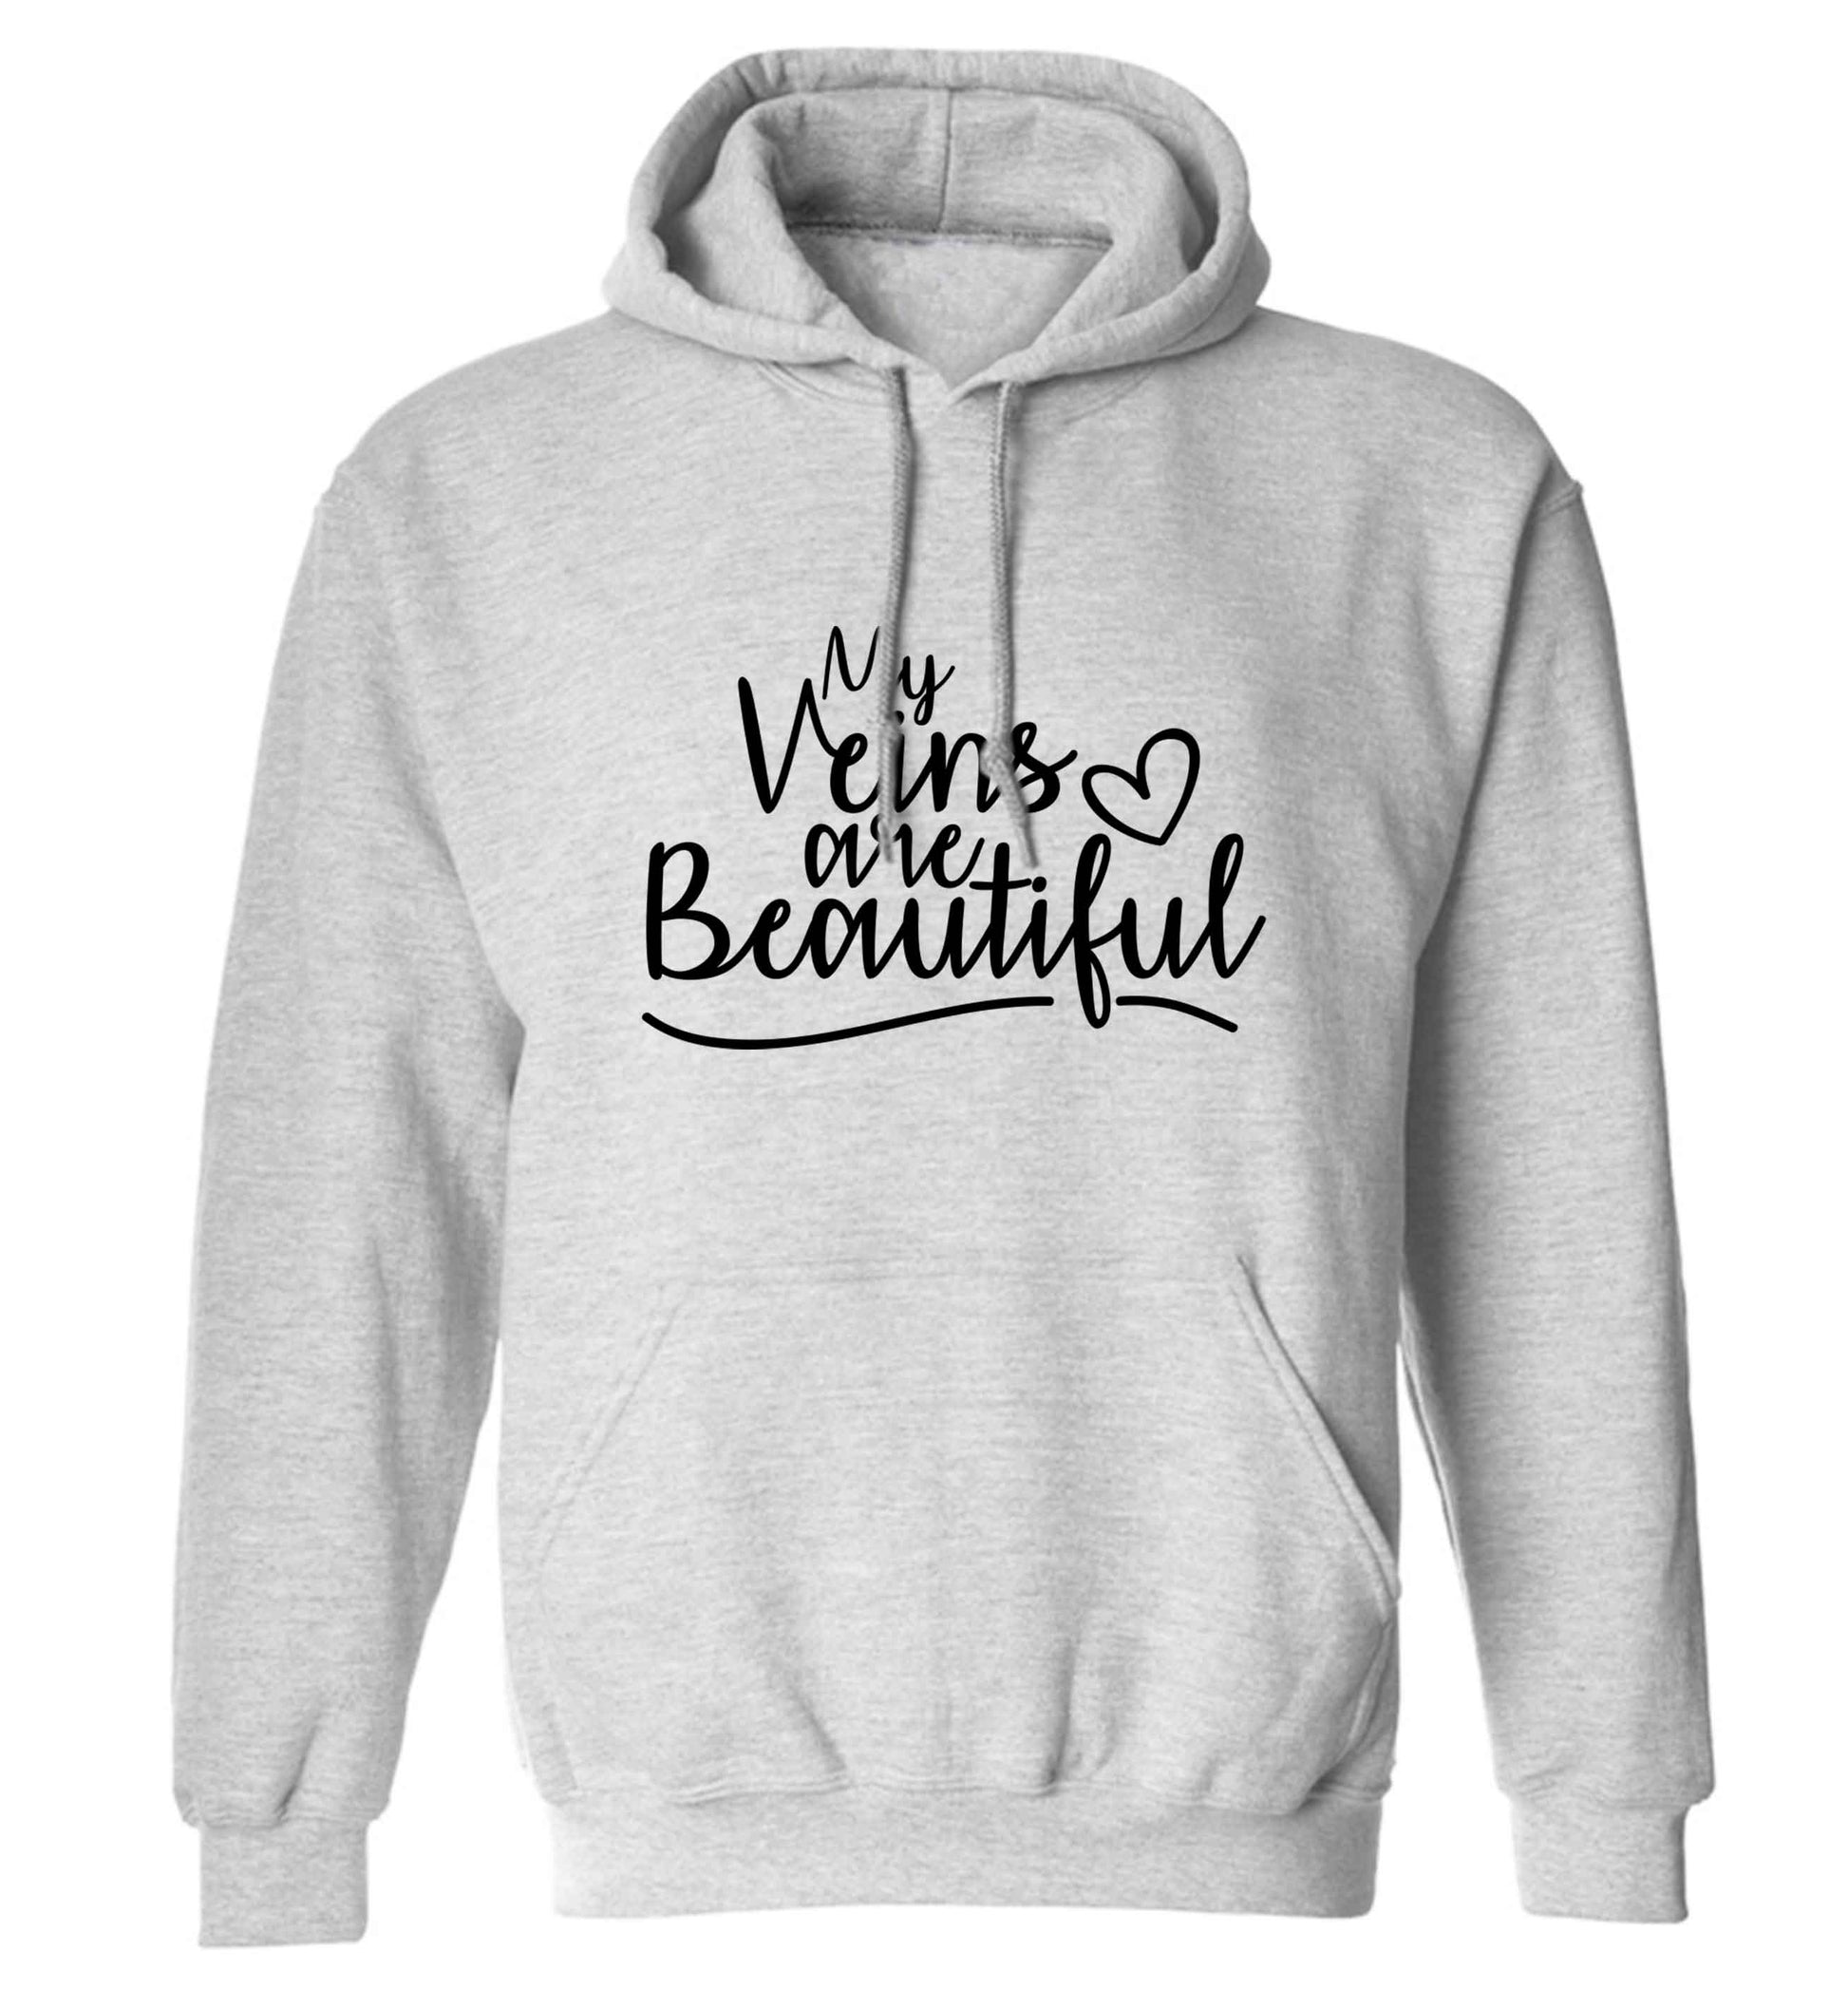 My Veins are Beautiful adults unisex grey hoodie 2XL